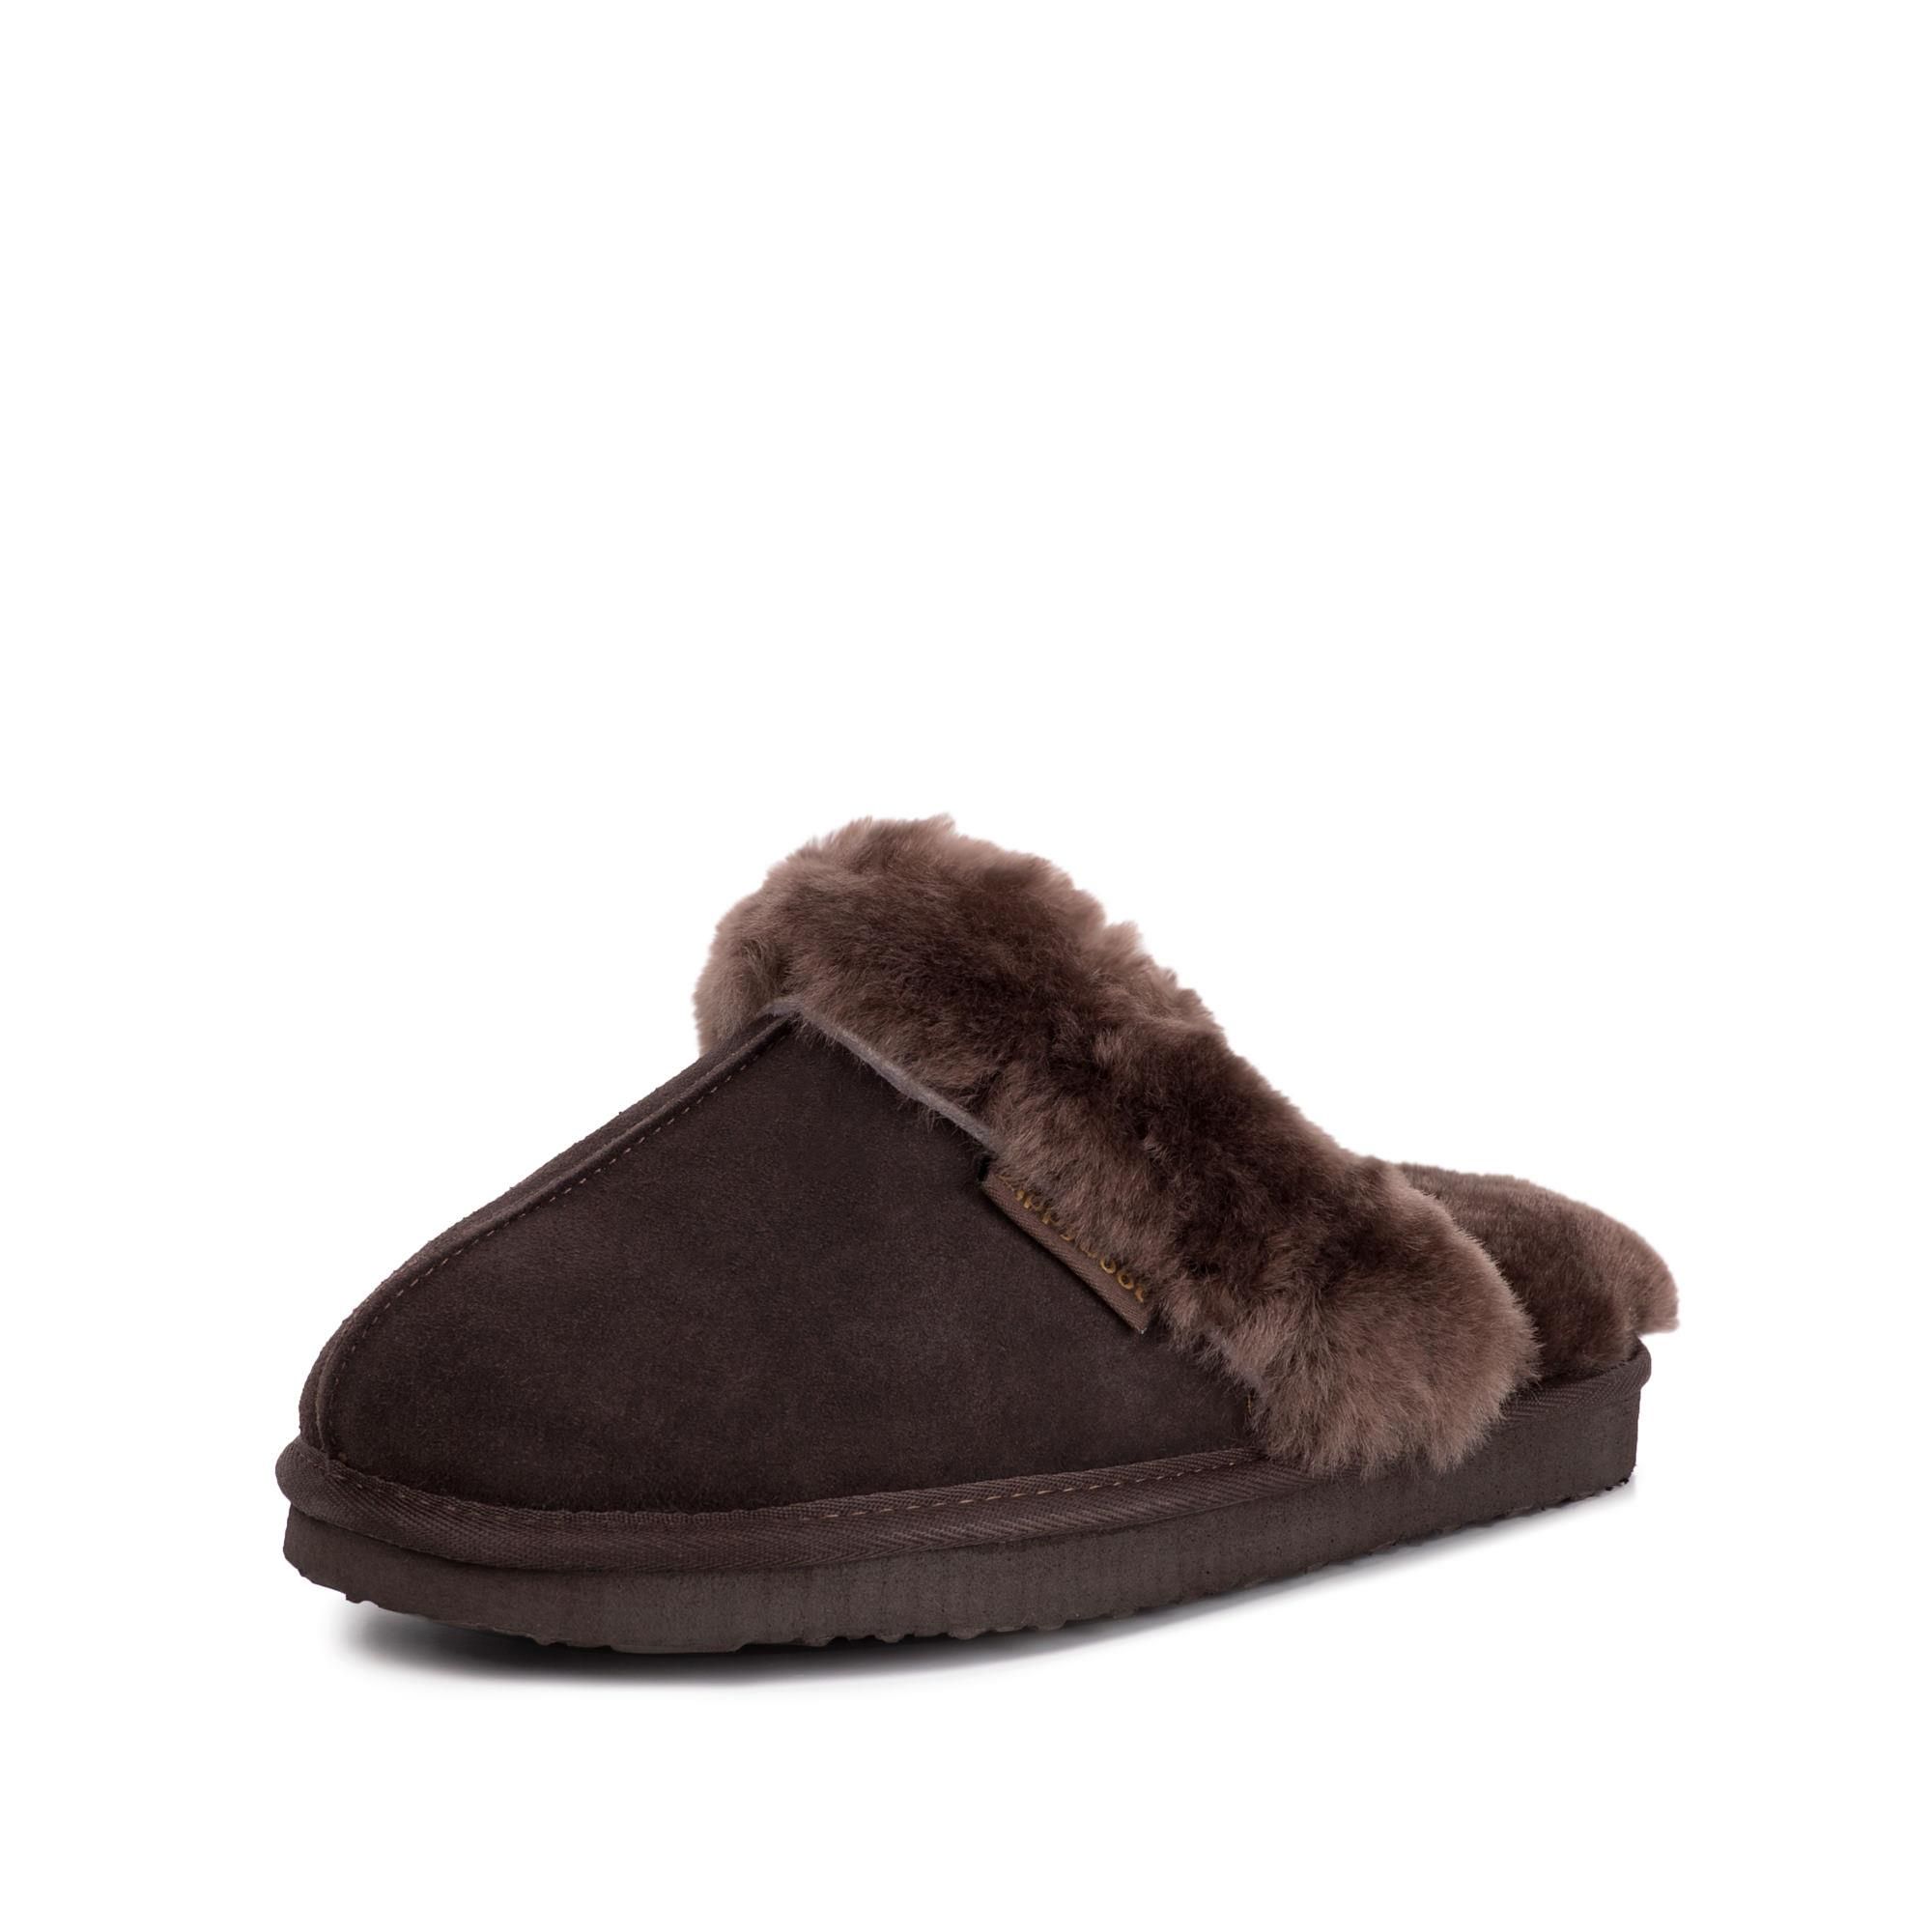 Redfoot Ann Chocolate Slippers